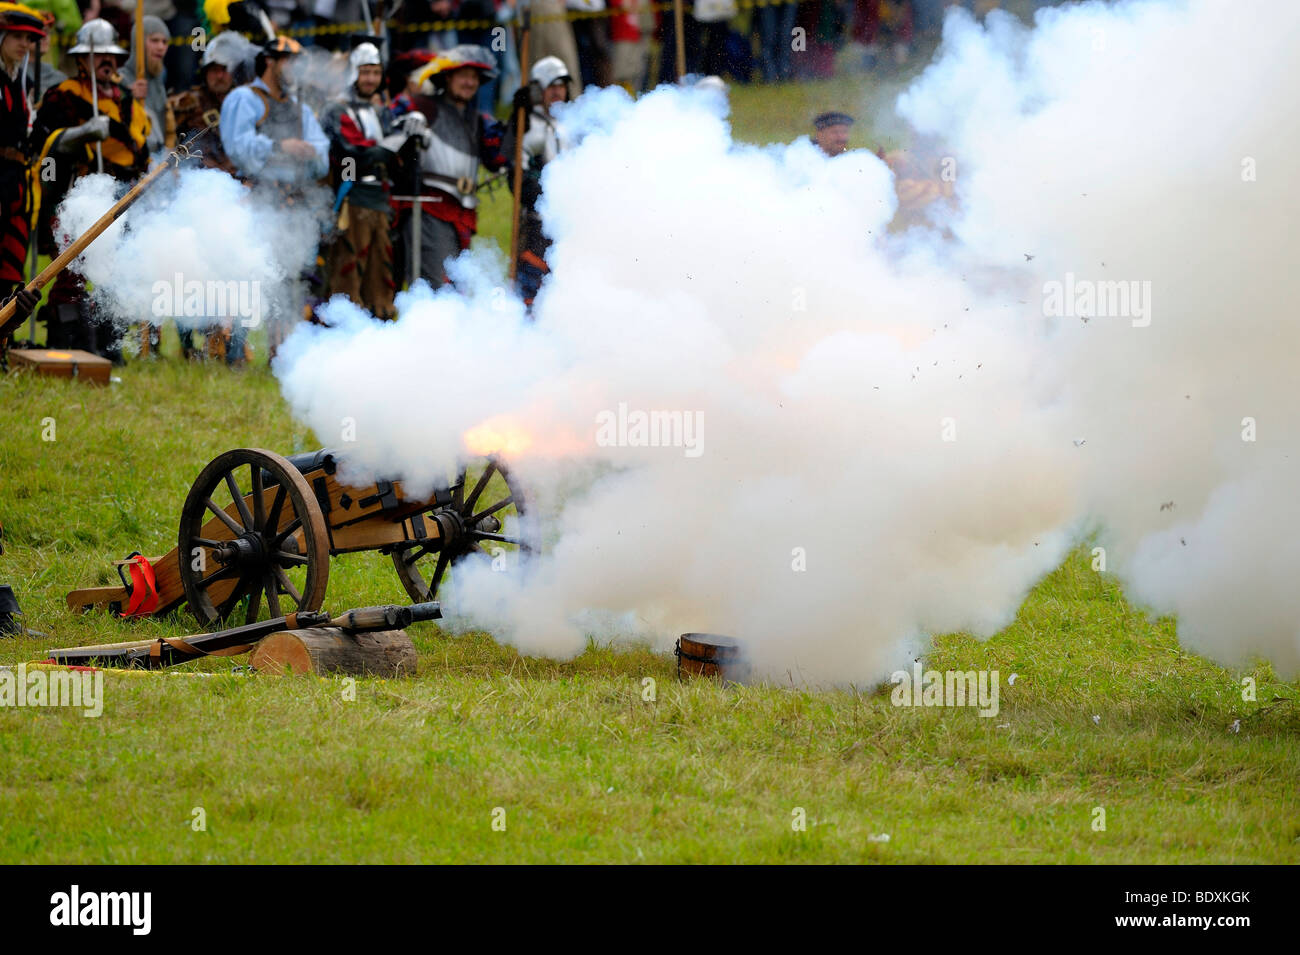 Cannon being fired Stock Photo